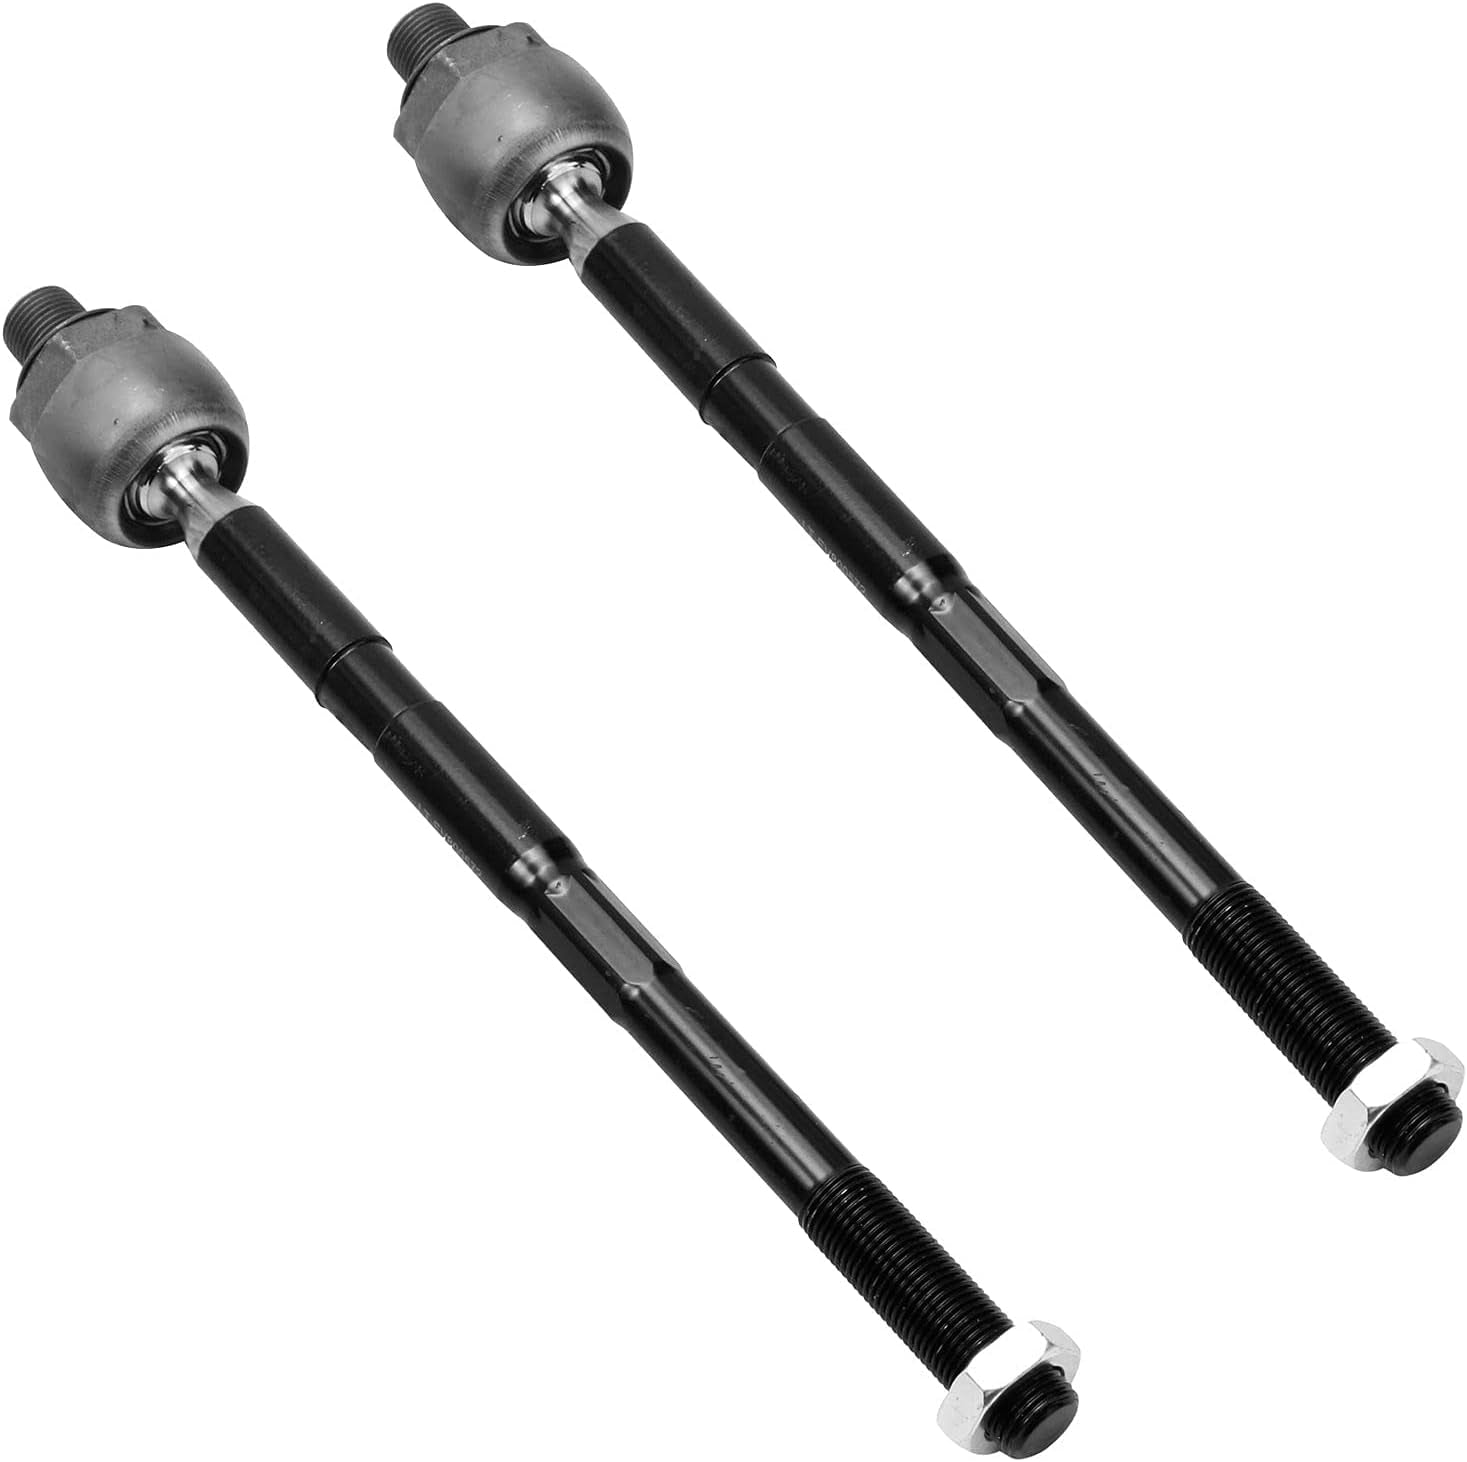 Detroit Axle - 10Pc Front End Suspension Kit for Buick Enclave Chevy Traverse GMC Acadia Limited Saturn Outlook, 2 Lower Control Arms 2 Sway Bars 4 Outer & Inner Tie Rods 2 Boot & Bellows Replacement